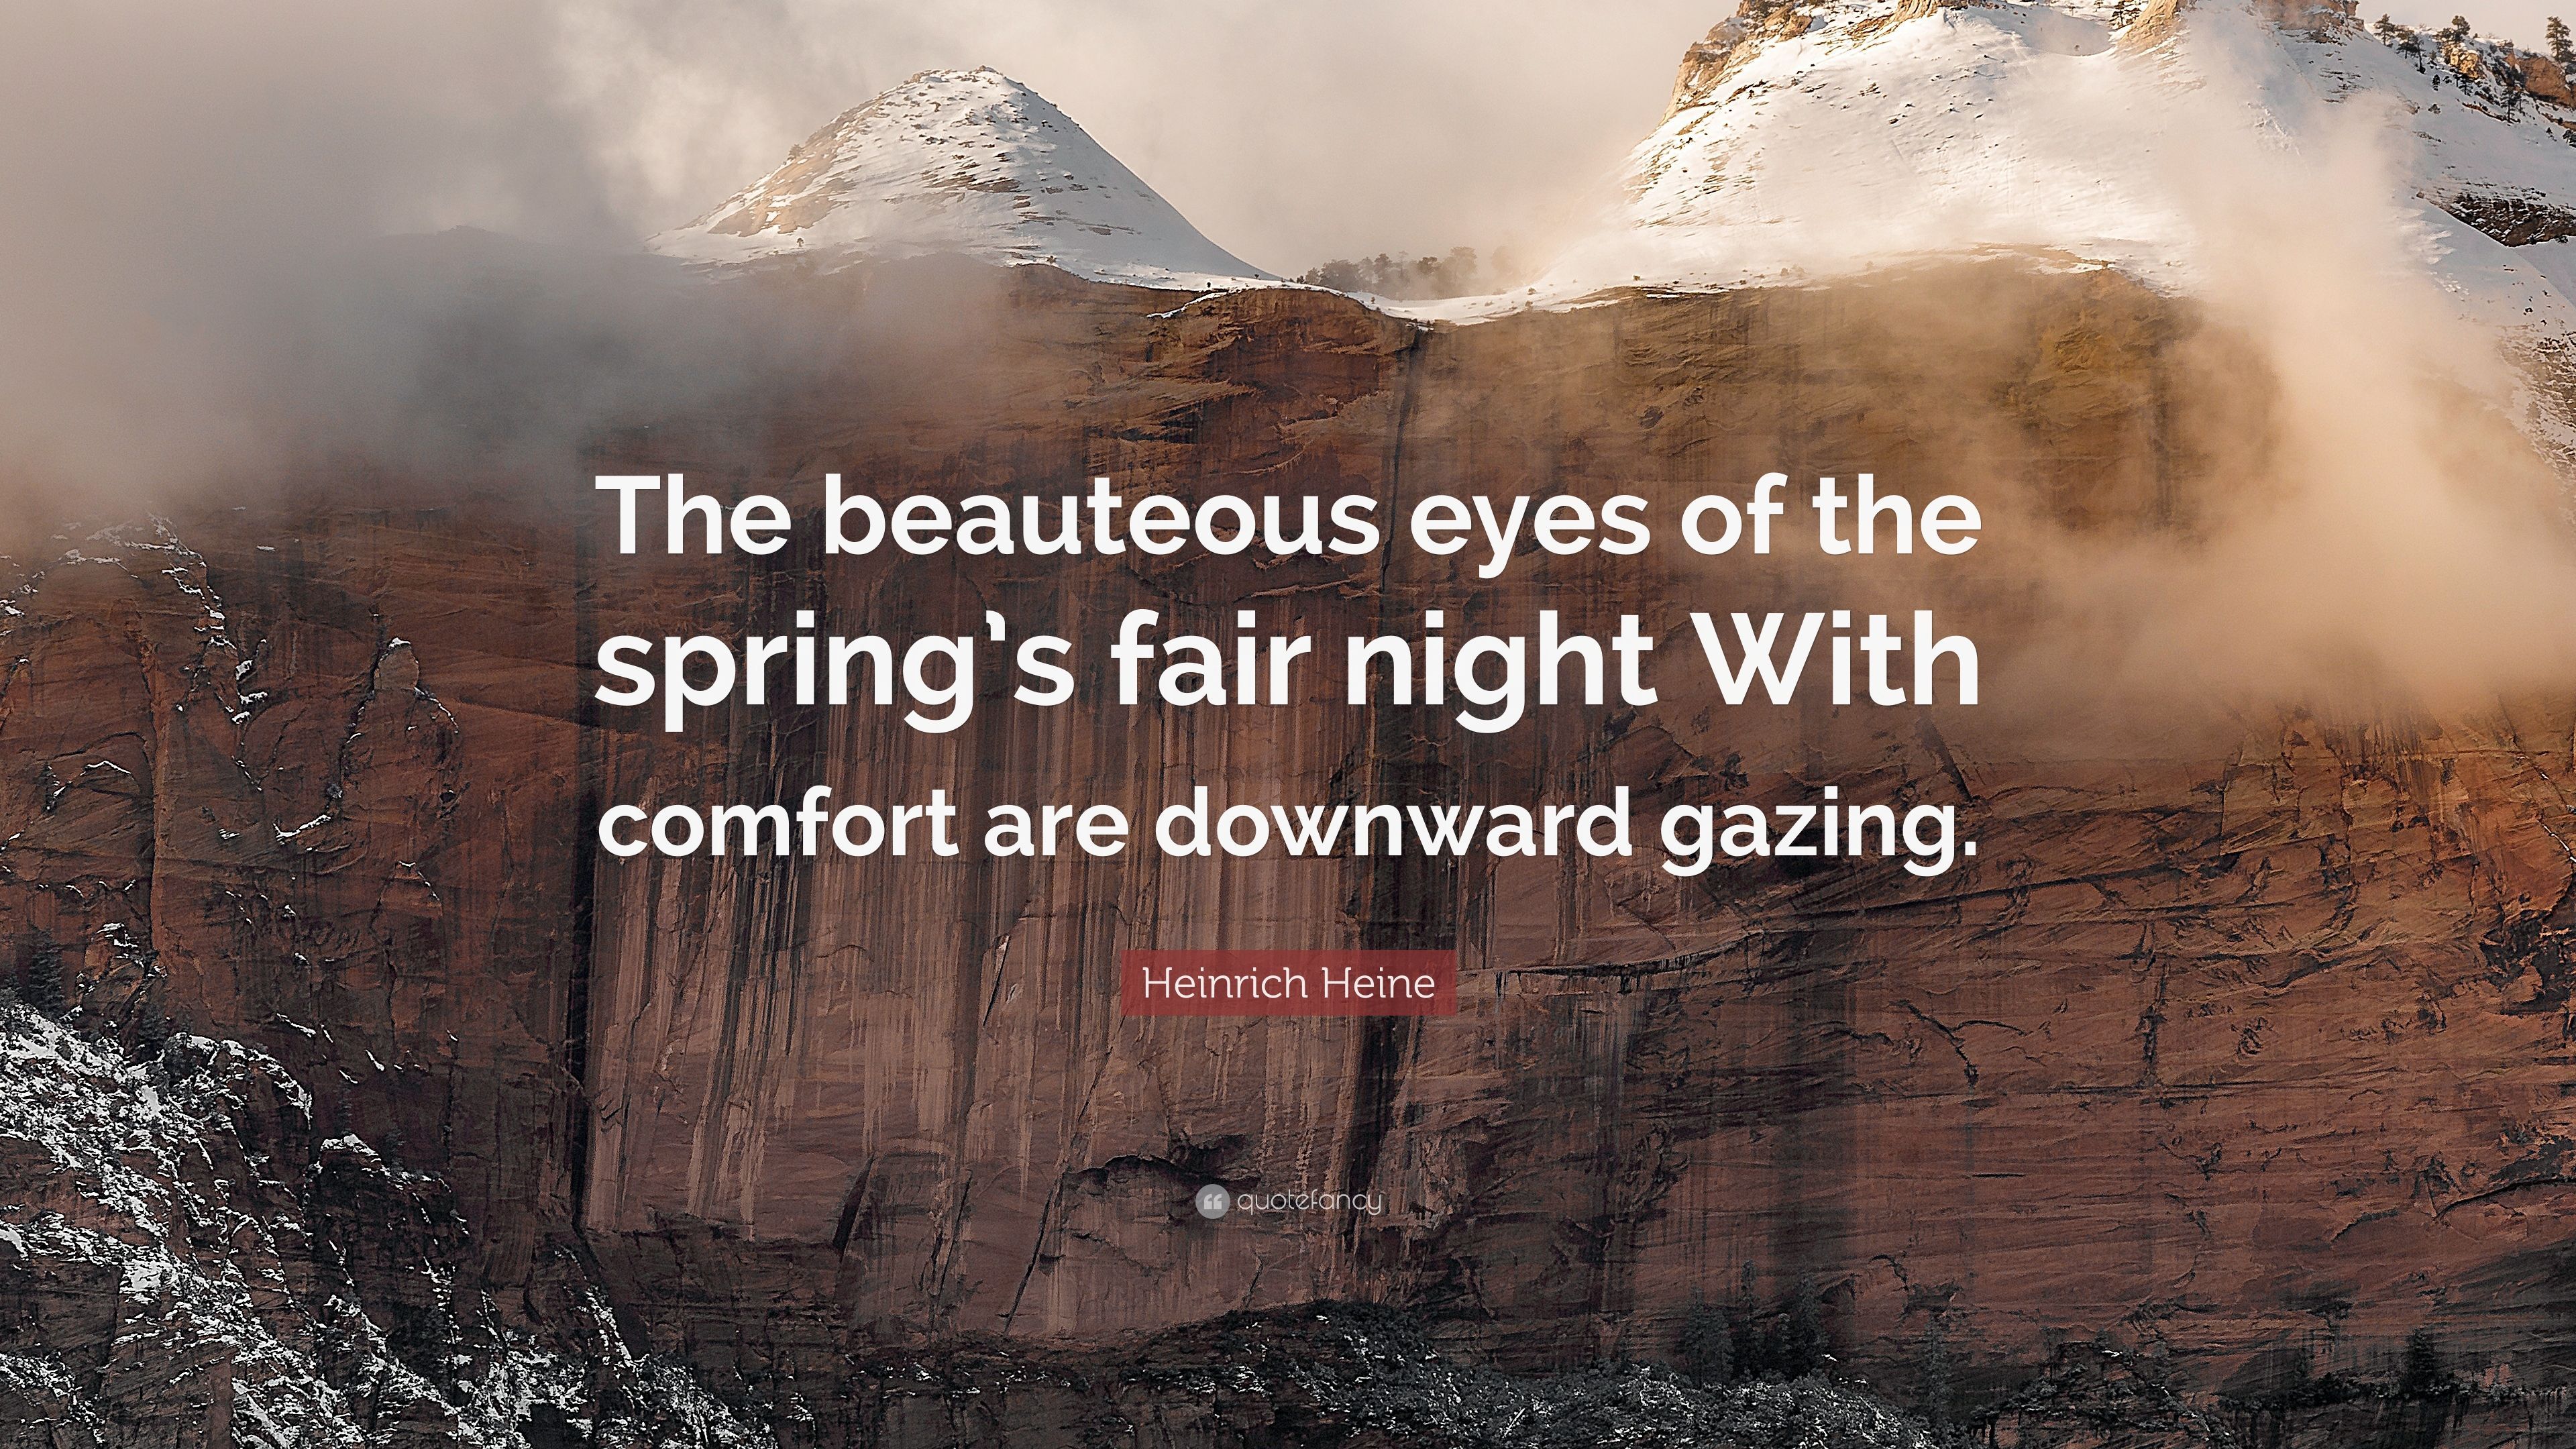 Heinrich Heine Quote: “The beauteous eyes of the spring's fair